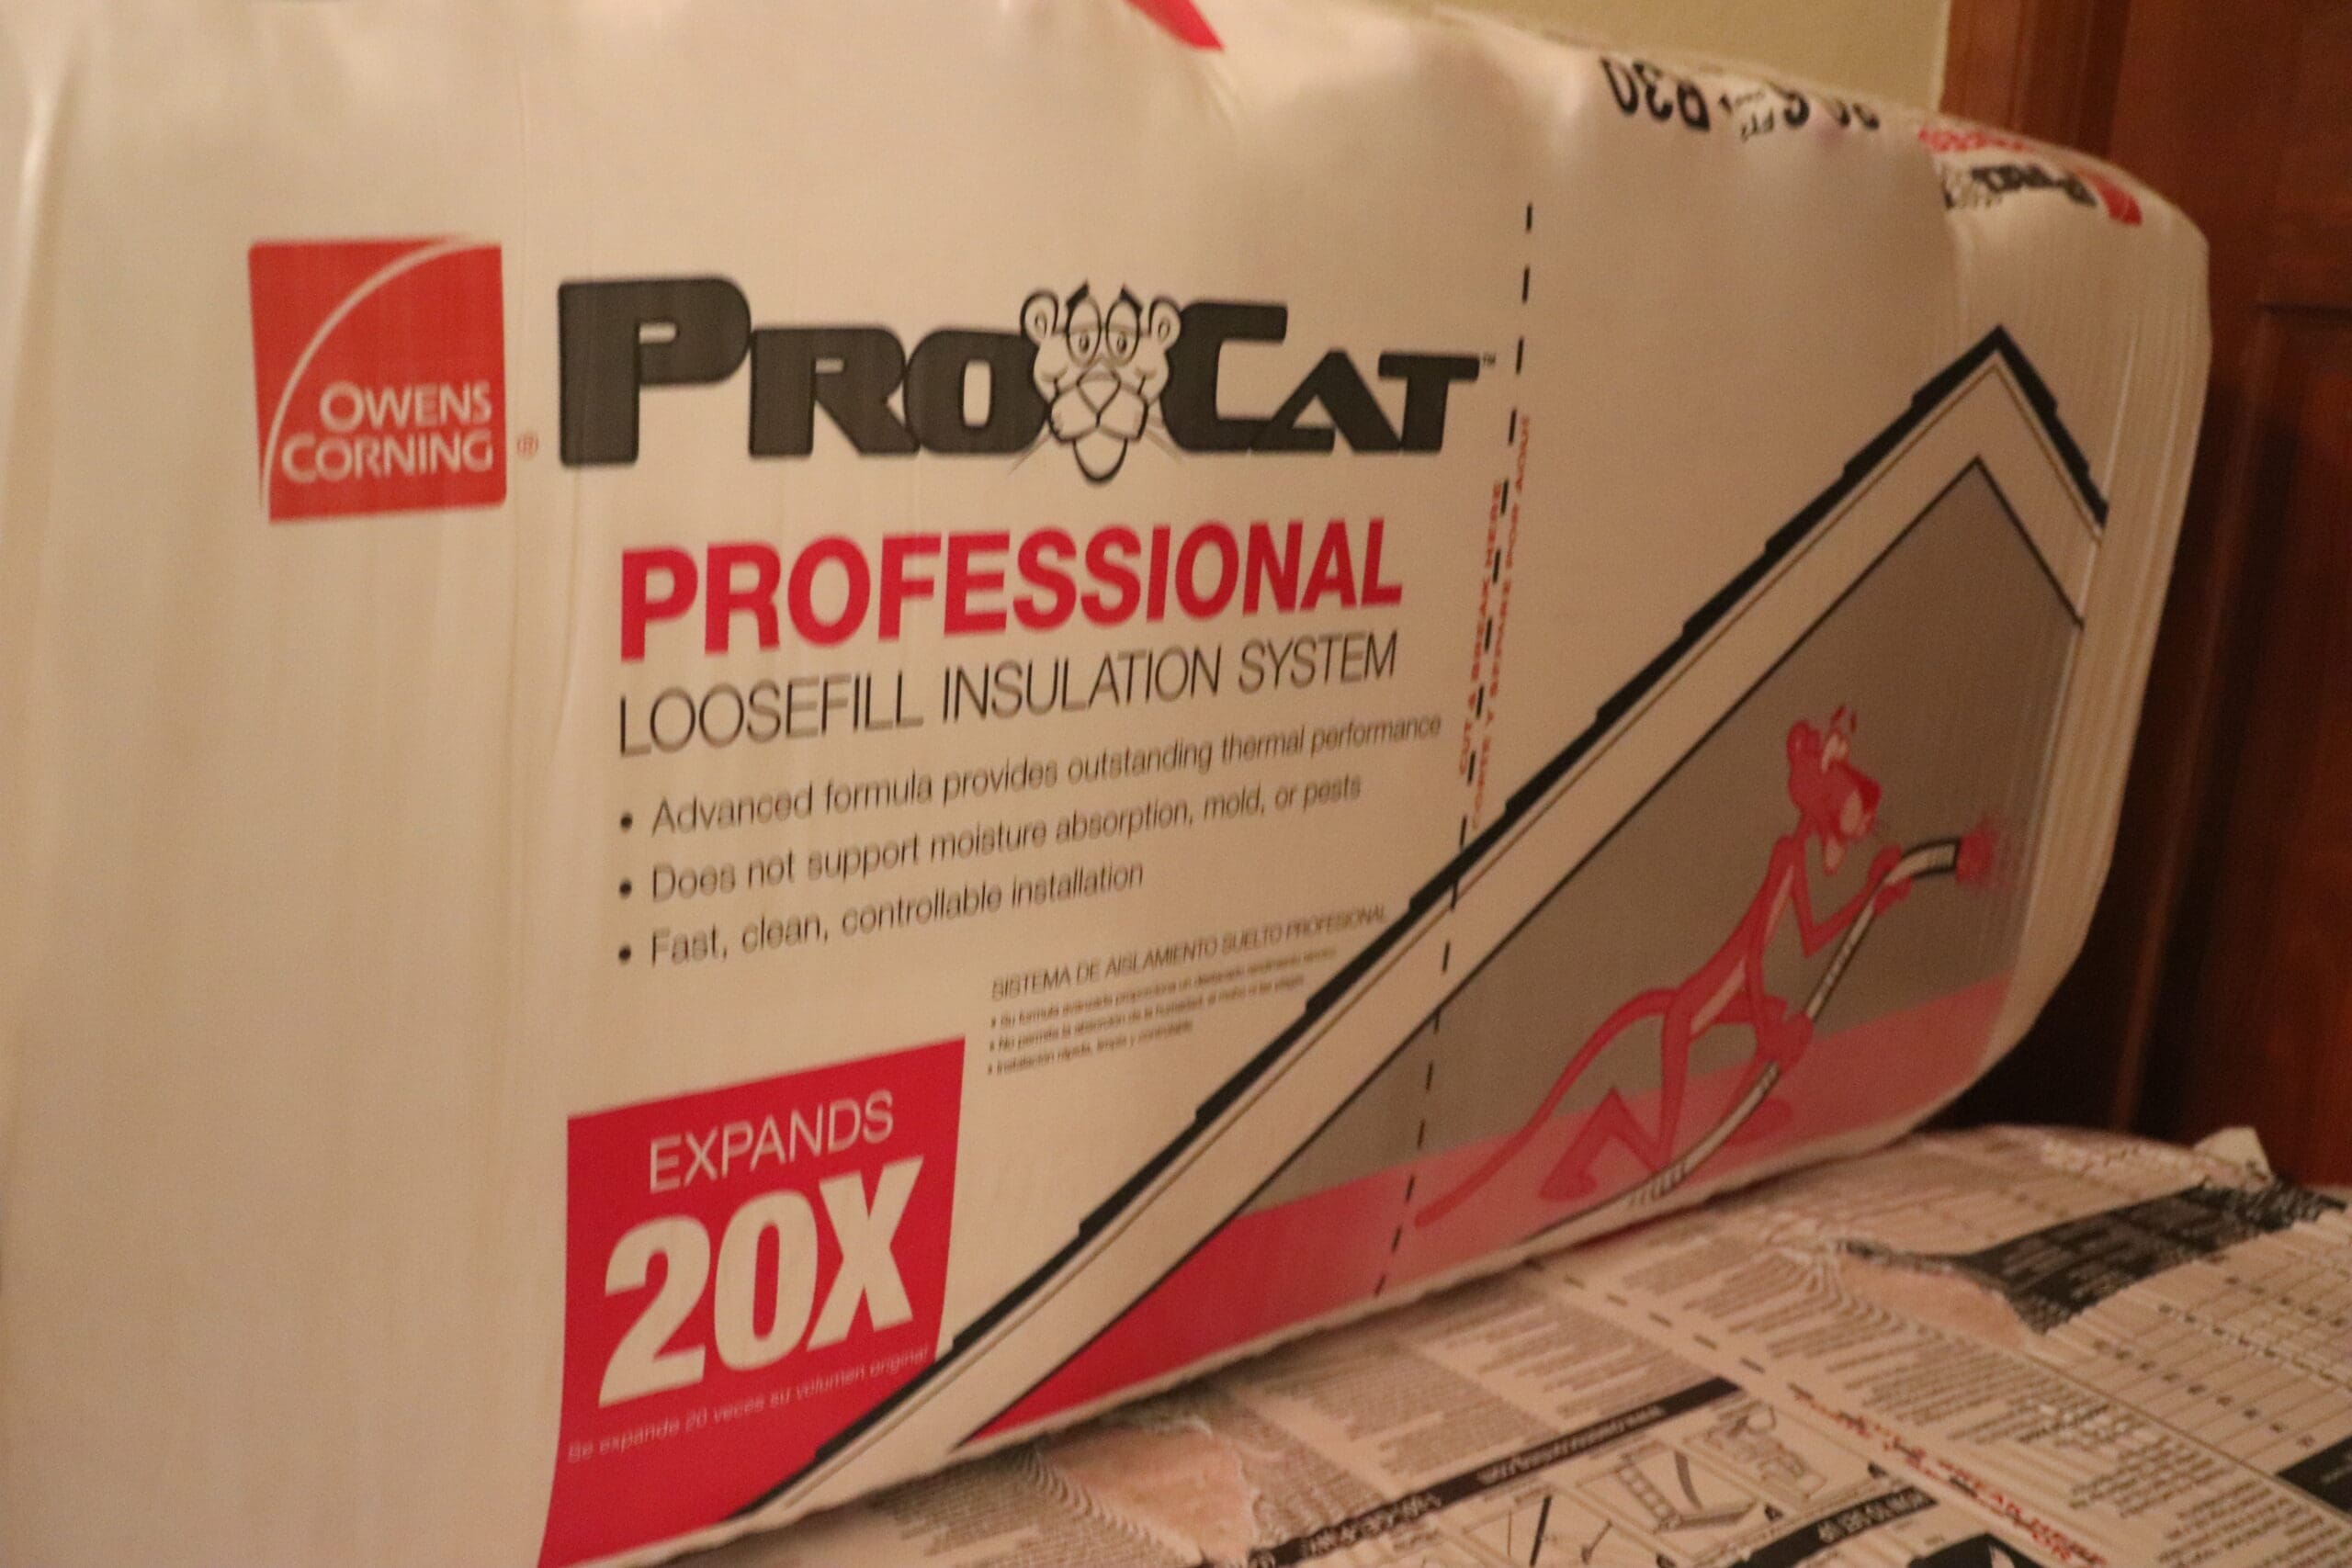 A bag of procat professional insulation is sitting on a table.